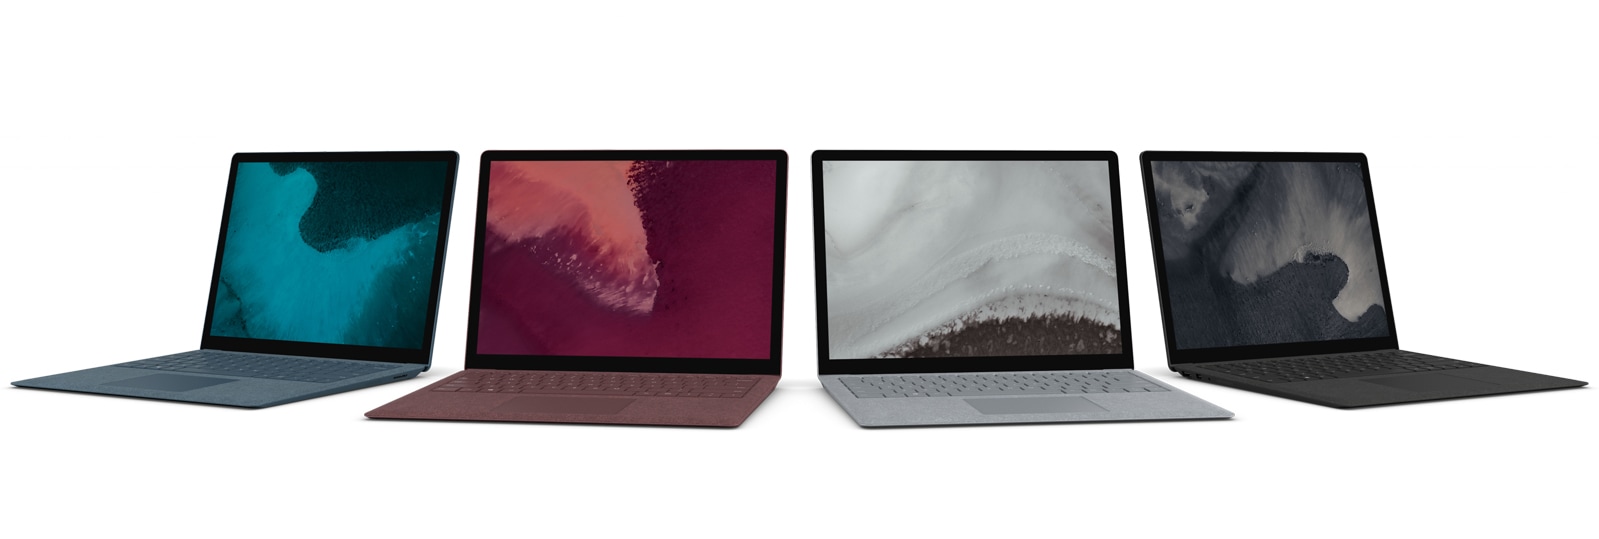 Four Surface Laptop 2 devices shown open in all colors: Cobalt, Burgundy, Platinum, and Black